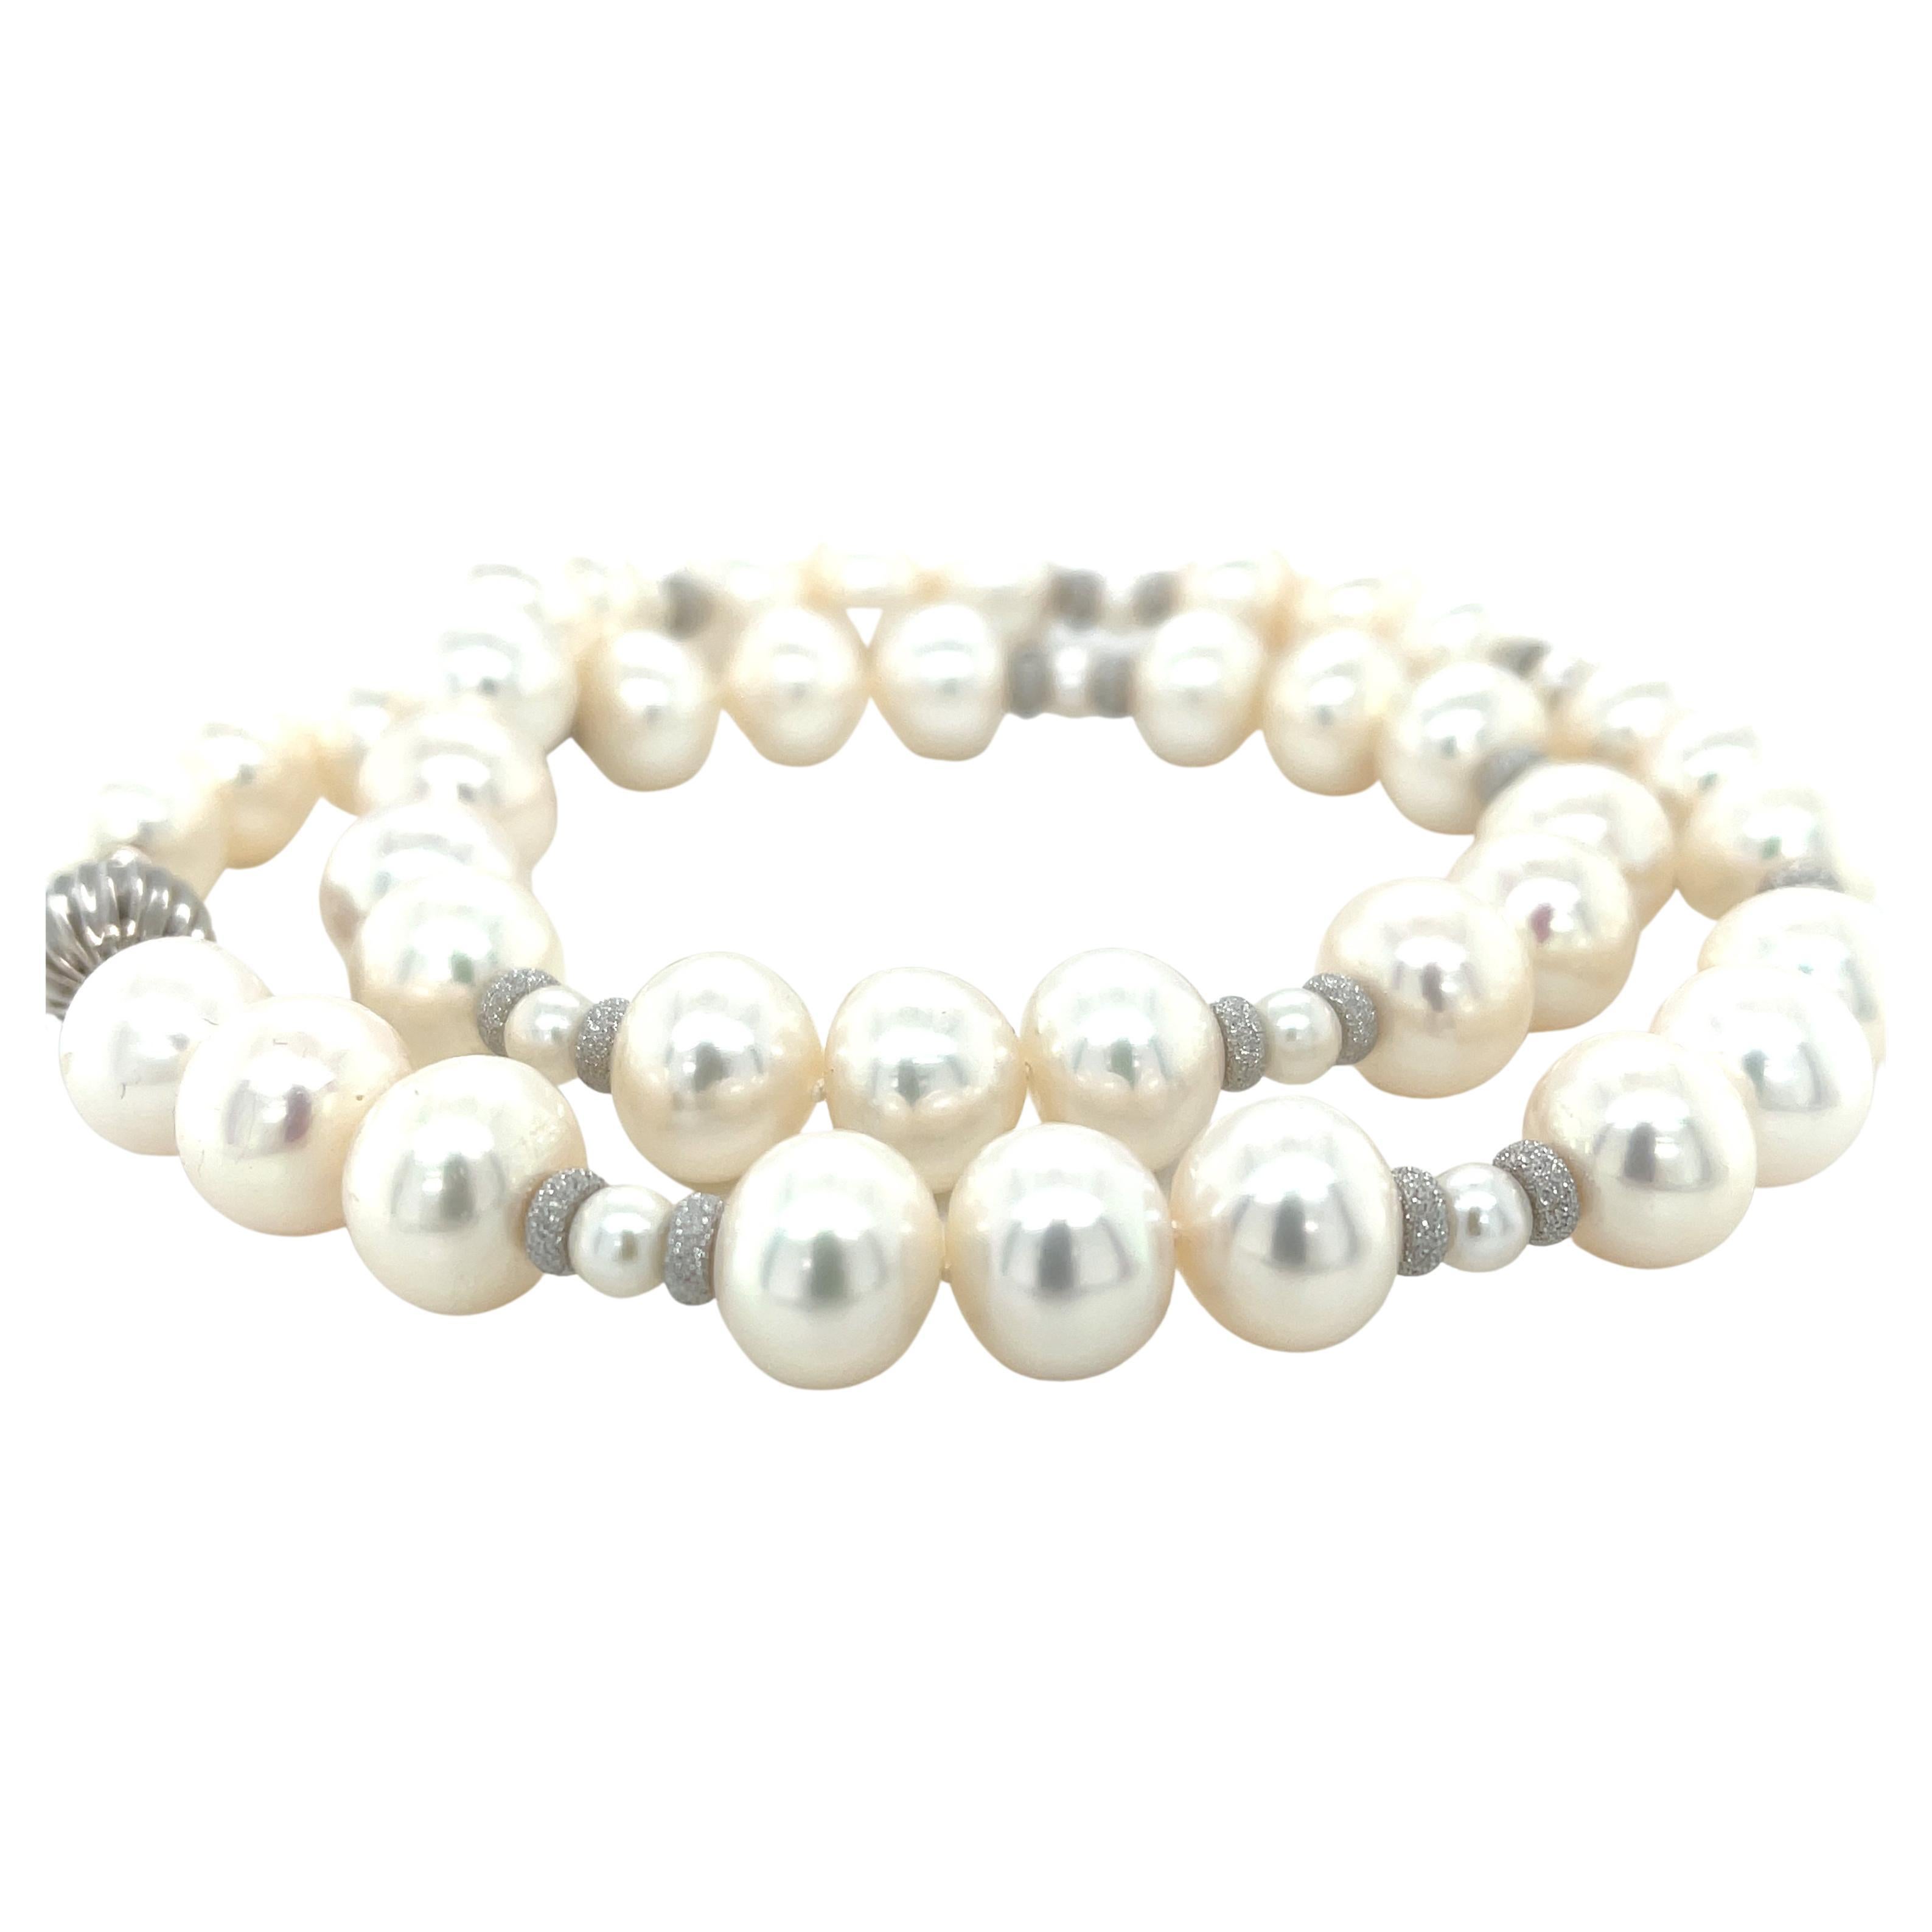 This contemporary strand of gorgeous white freshwater pearls is an updated version of a timeless classic! These pearls have beautiful luster, with subtle pink and gray tones and a fun 